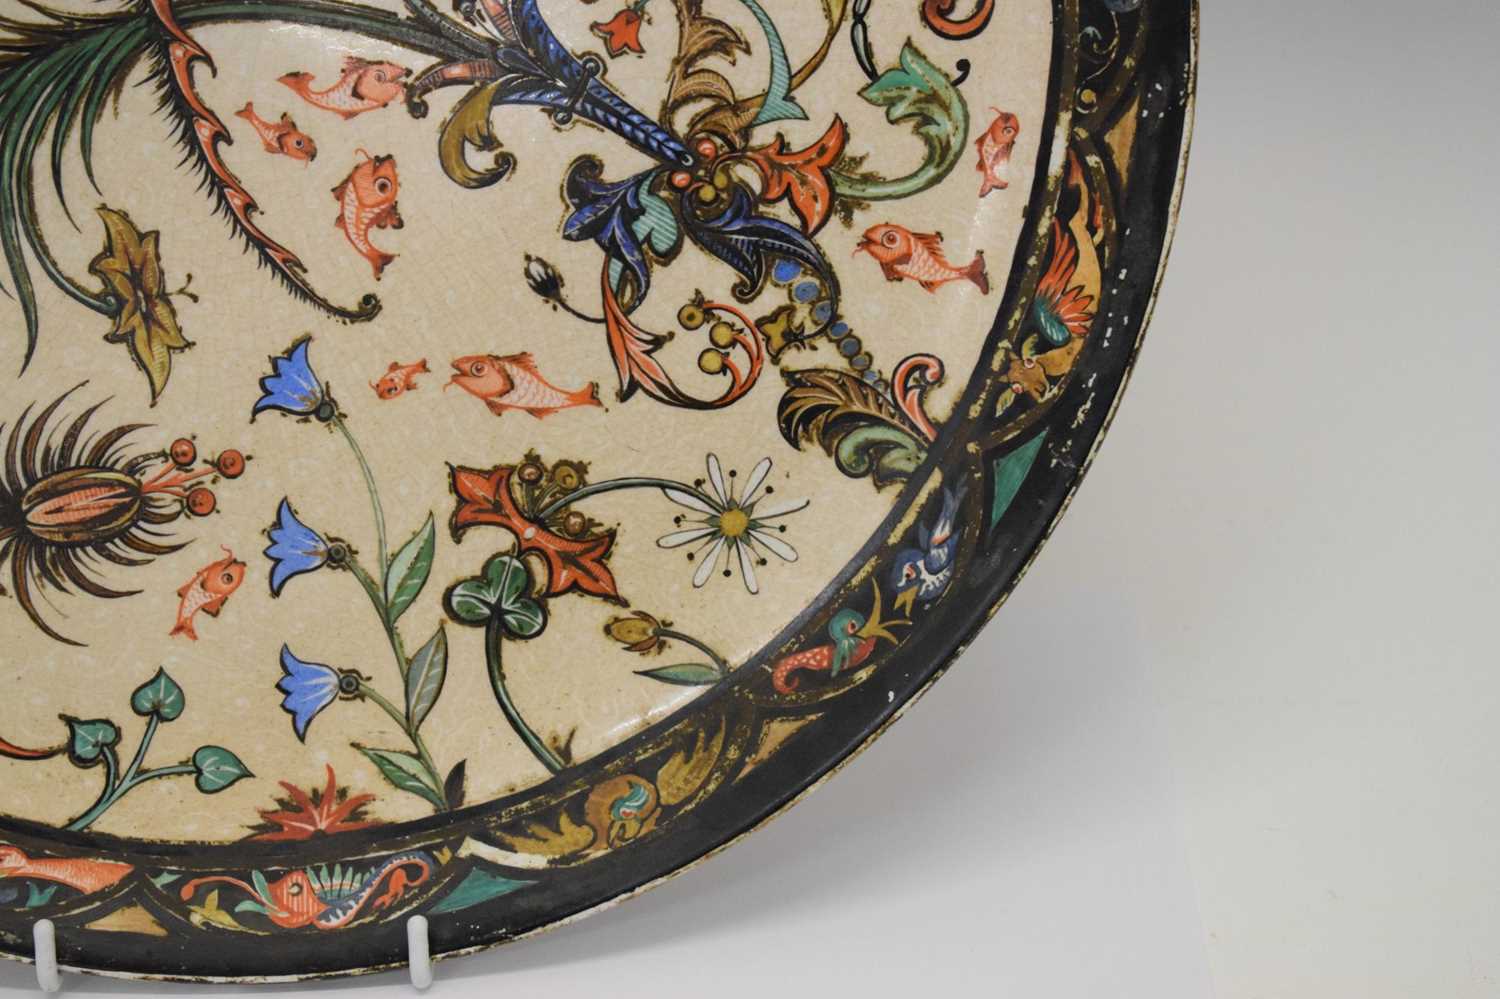 Aesthetic Charger 'Japanese Design, Howell & James Art Pottery Exhibition 1885' - Image 5 of 8